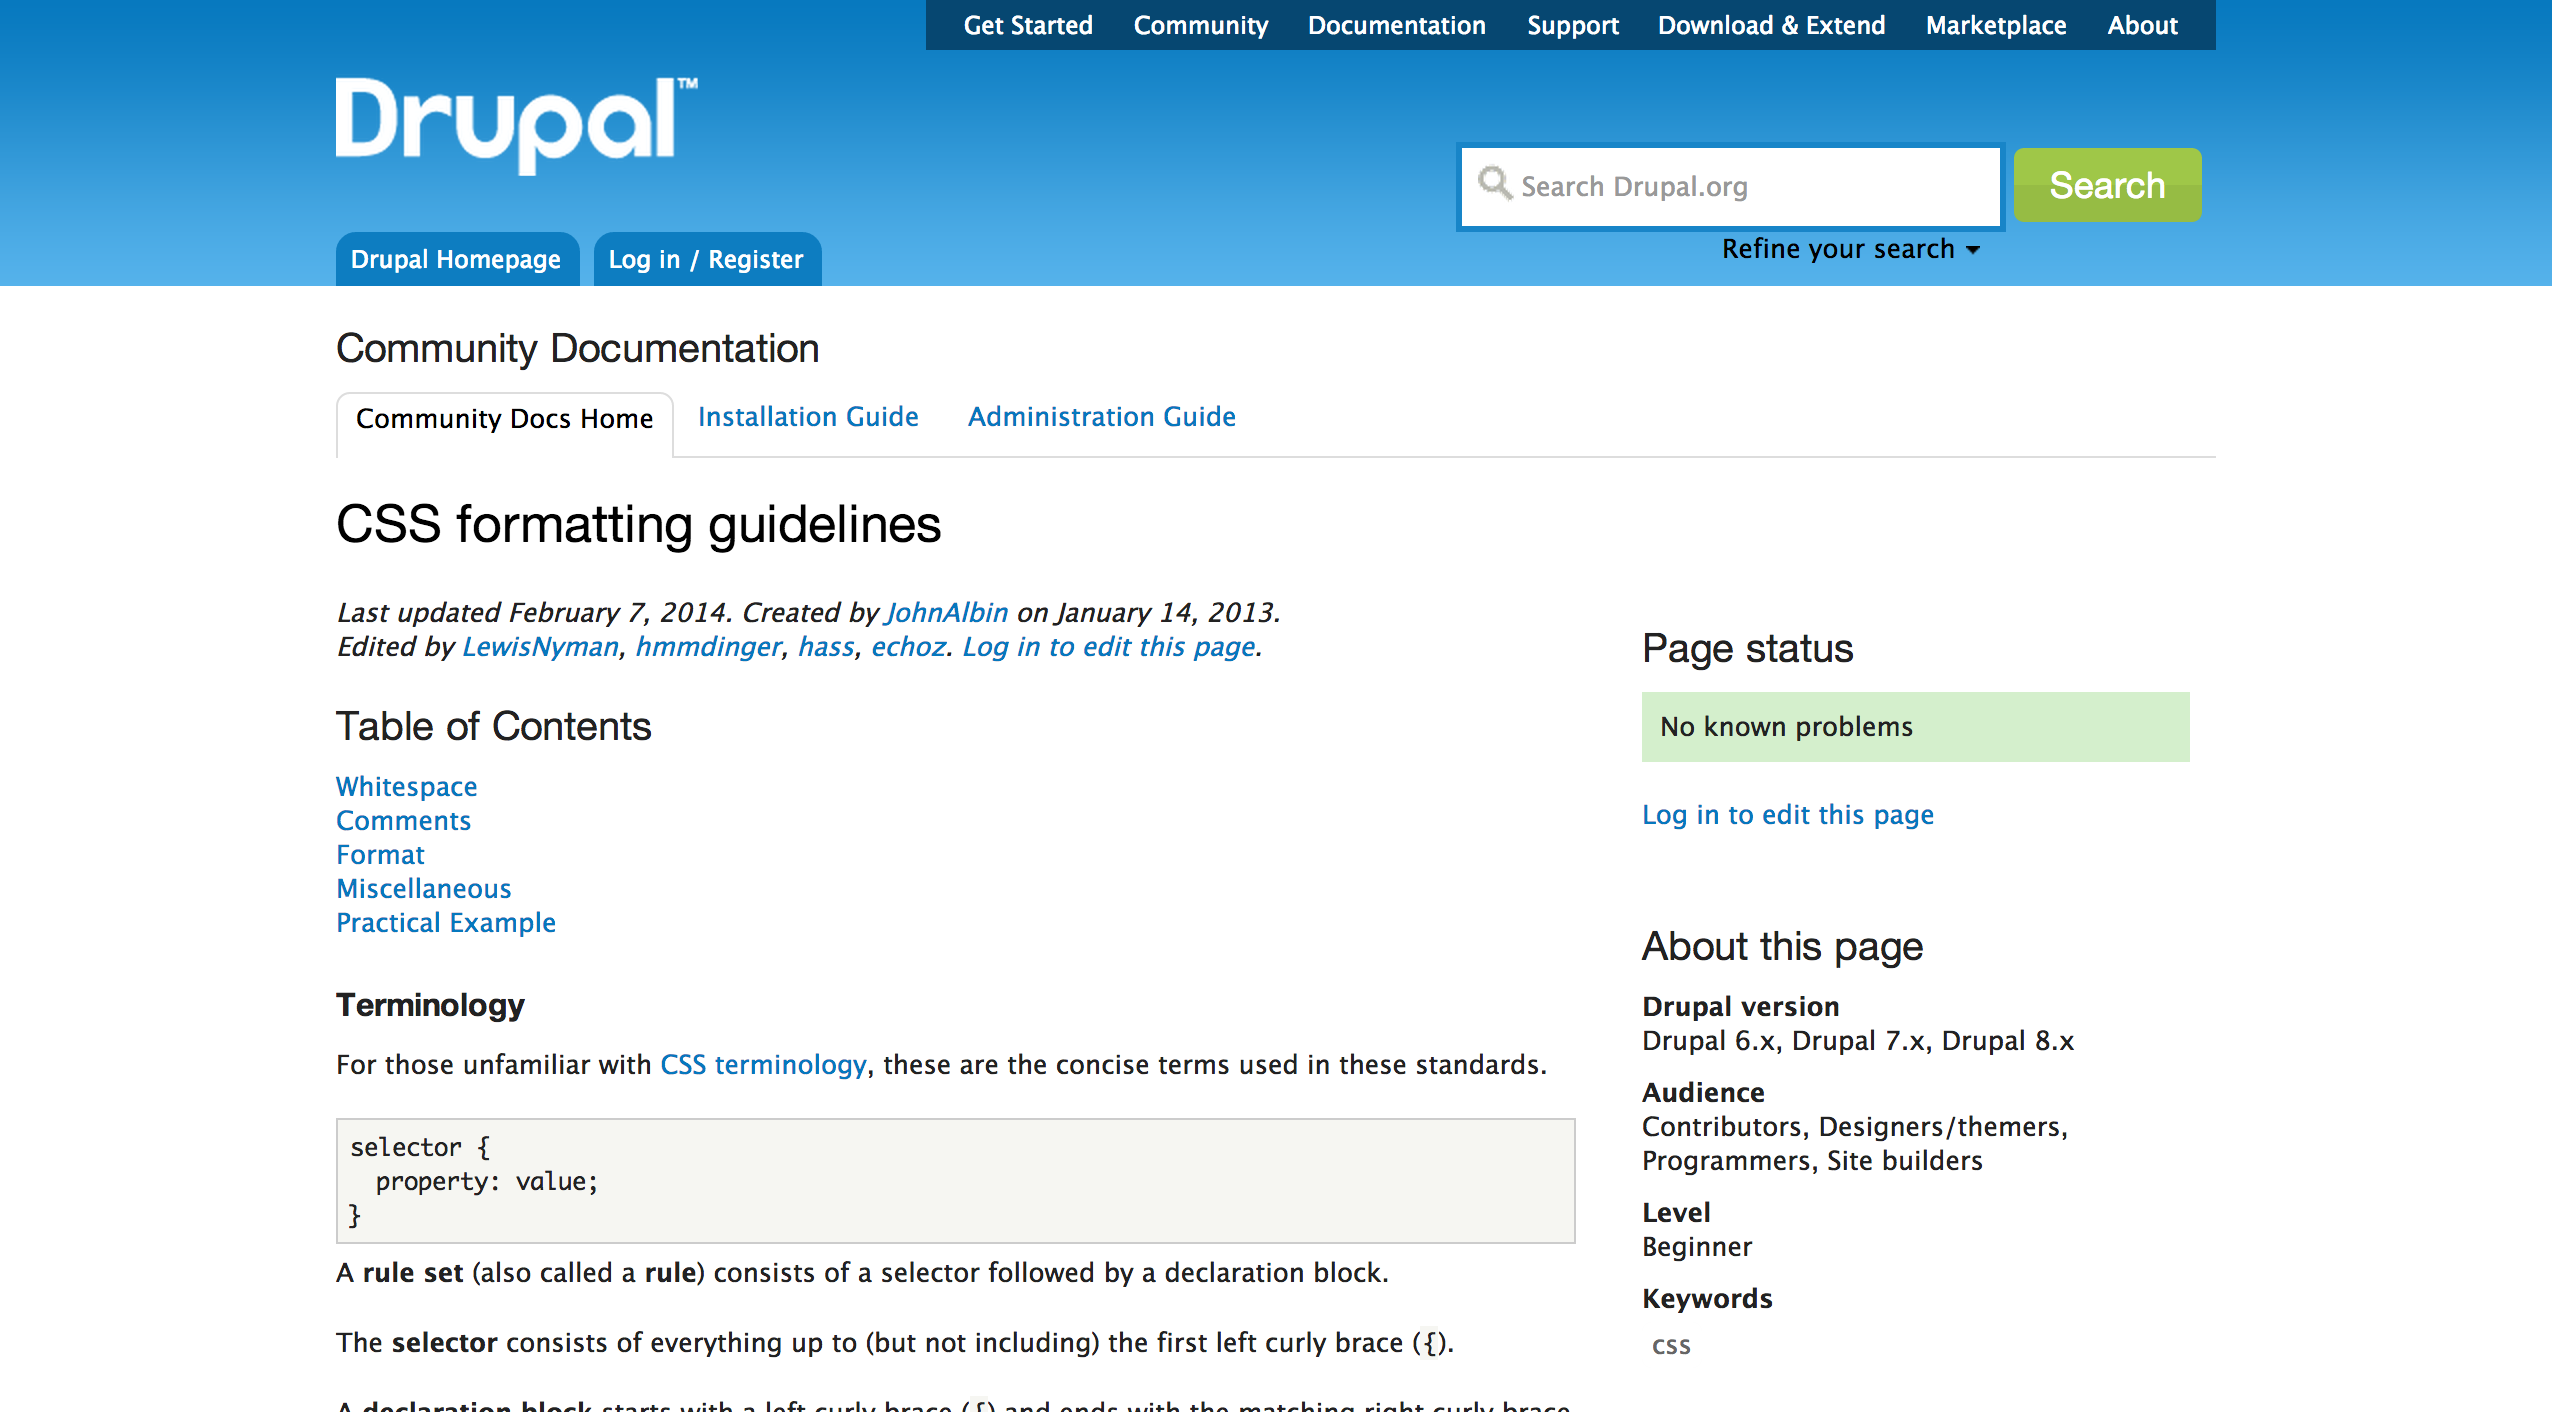 Drupal CSS formatting guidelines page